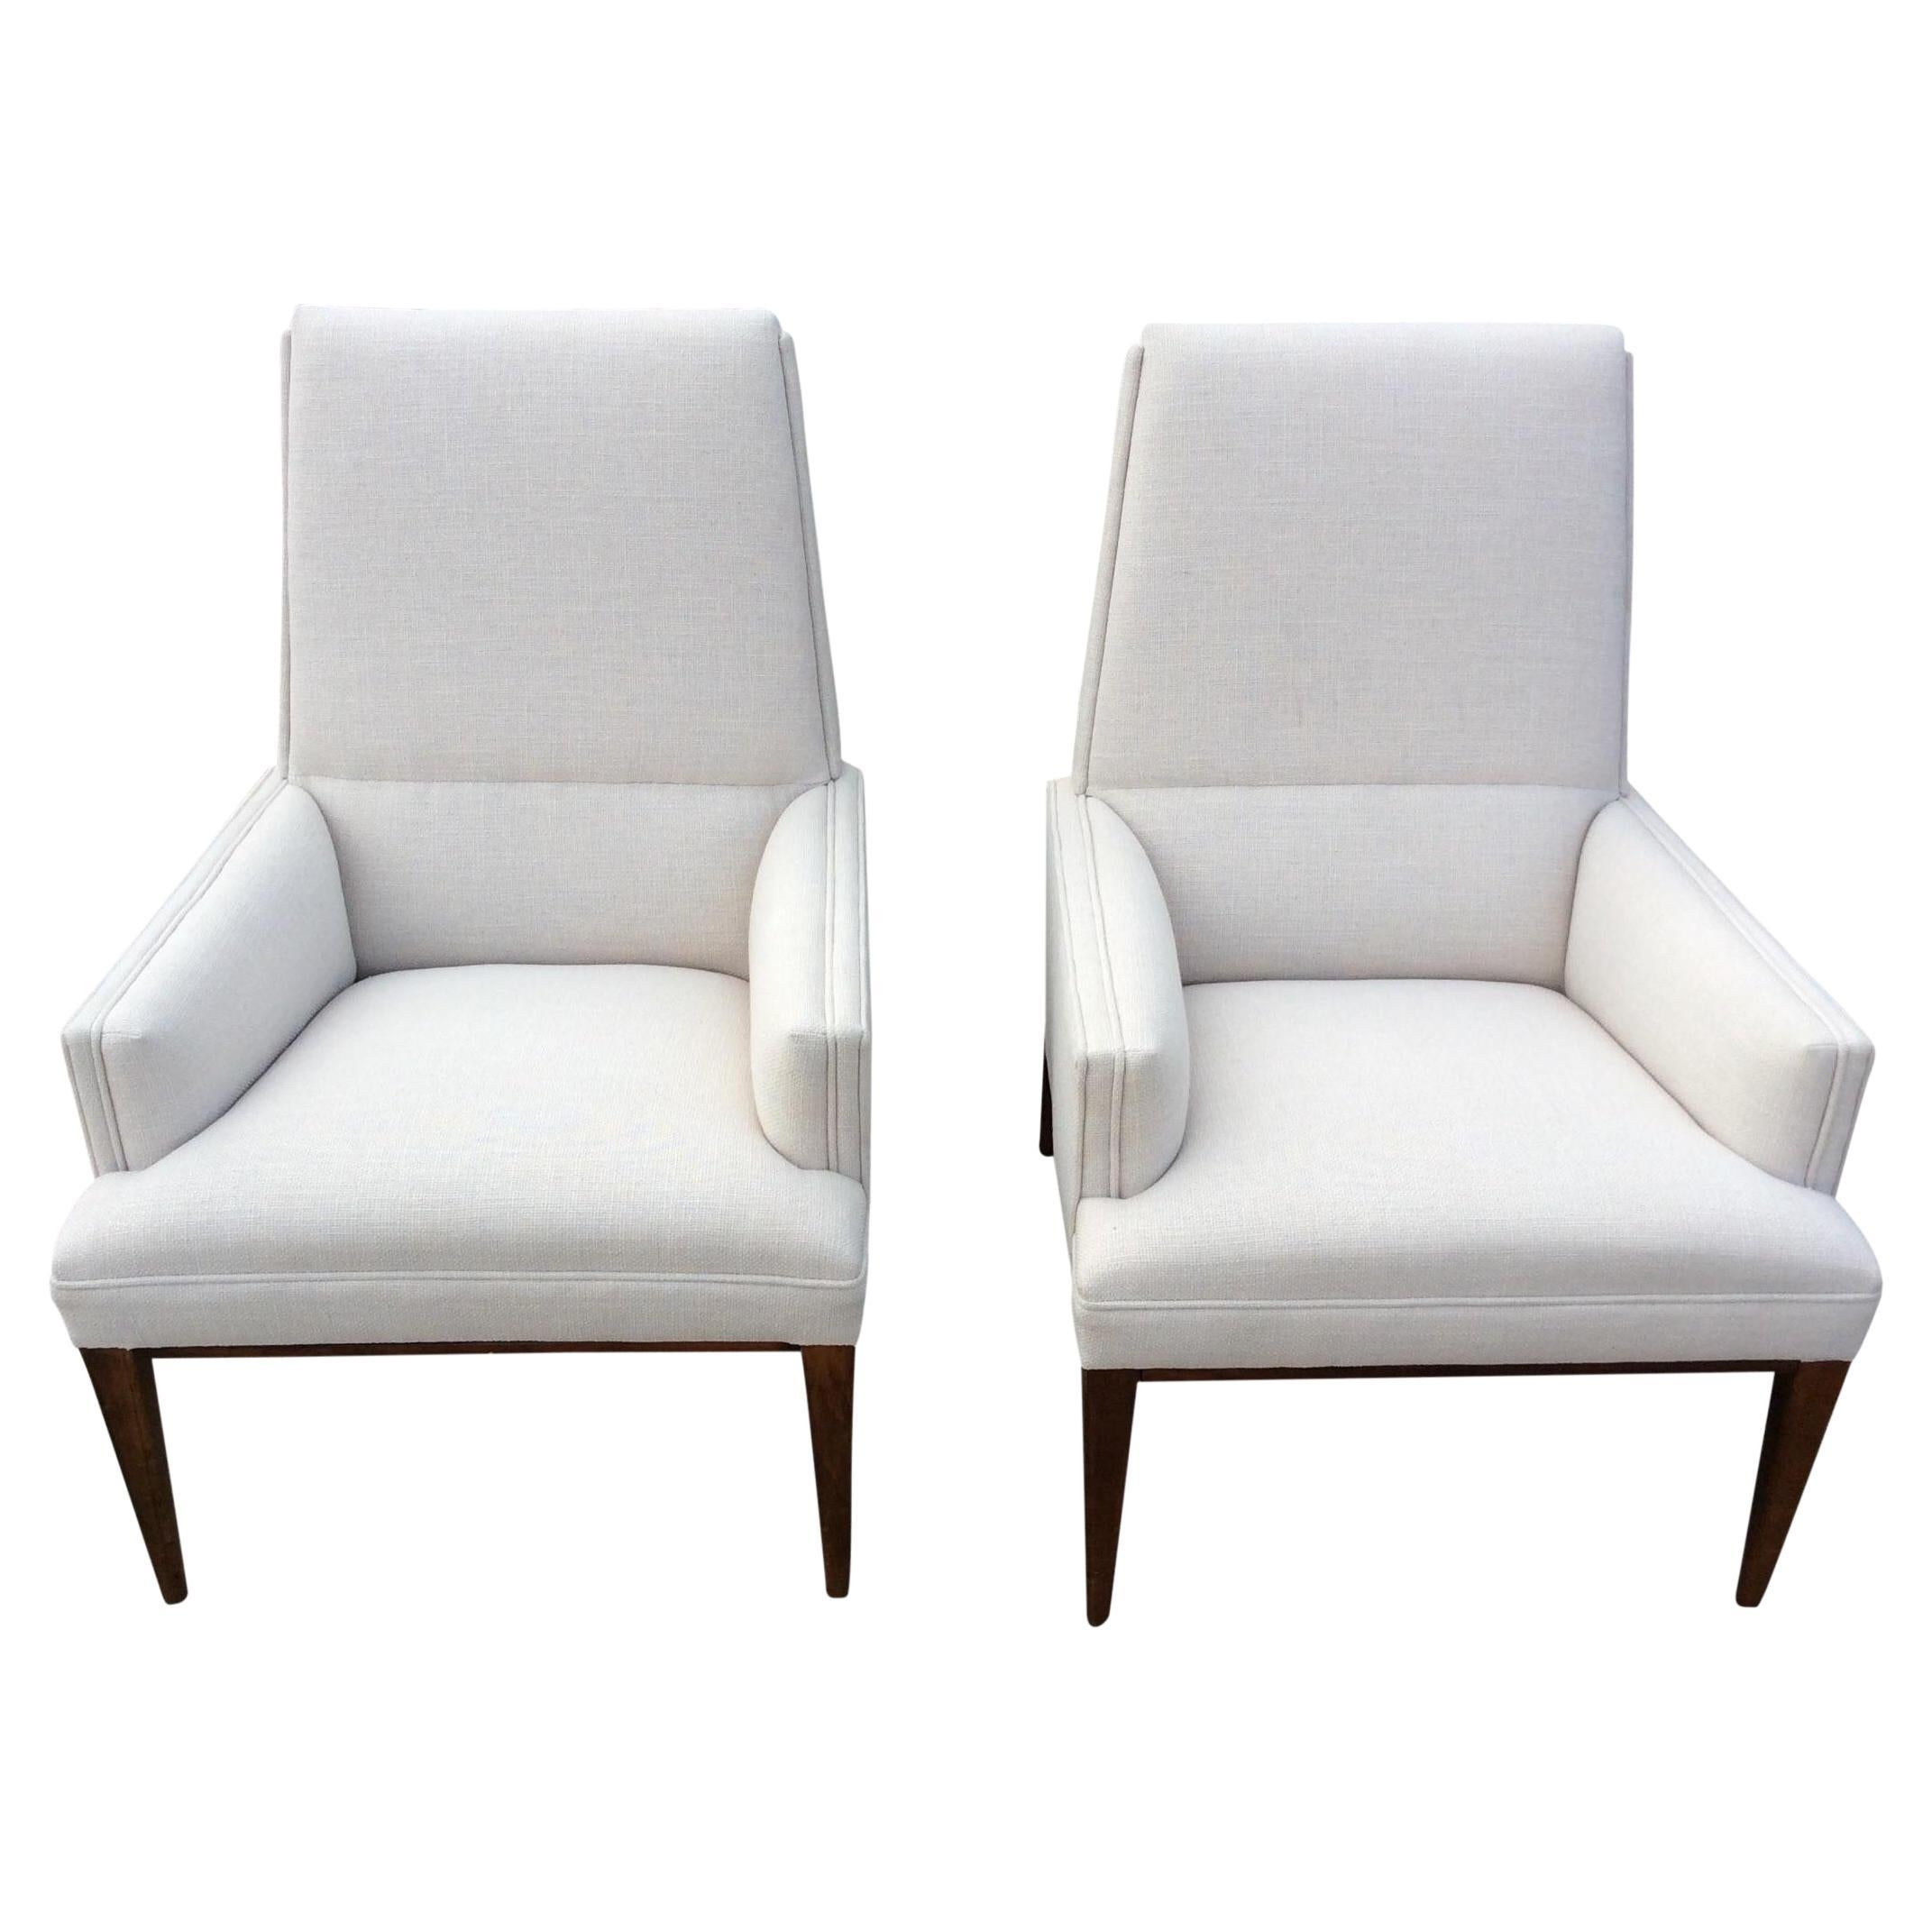 Mid-Century Modern Armchairs, a Pair For Sale